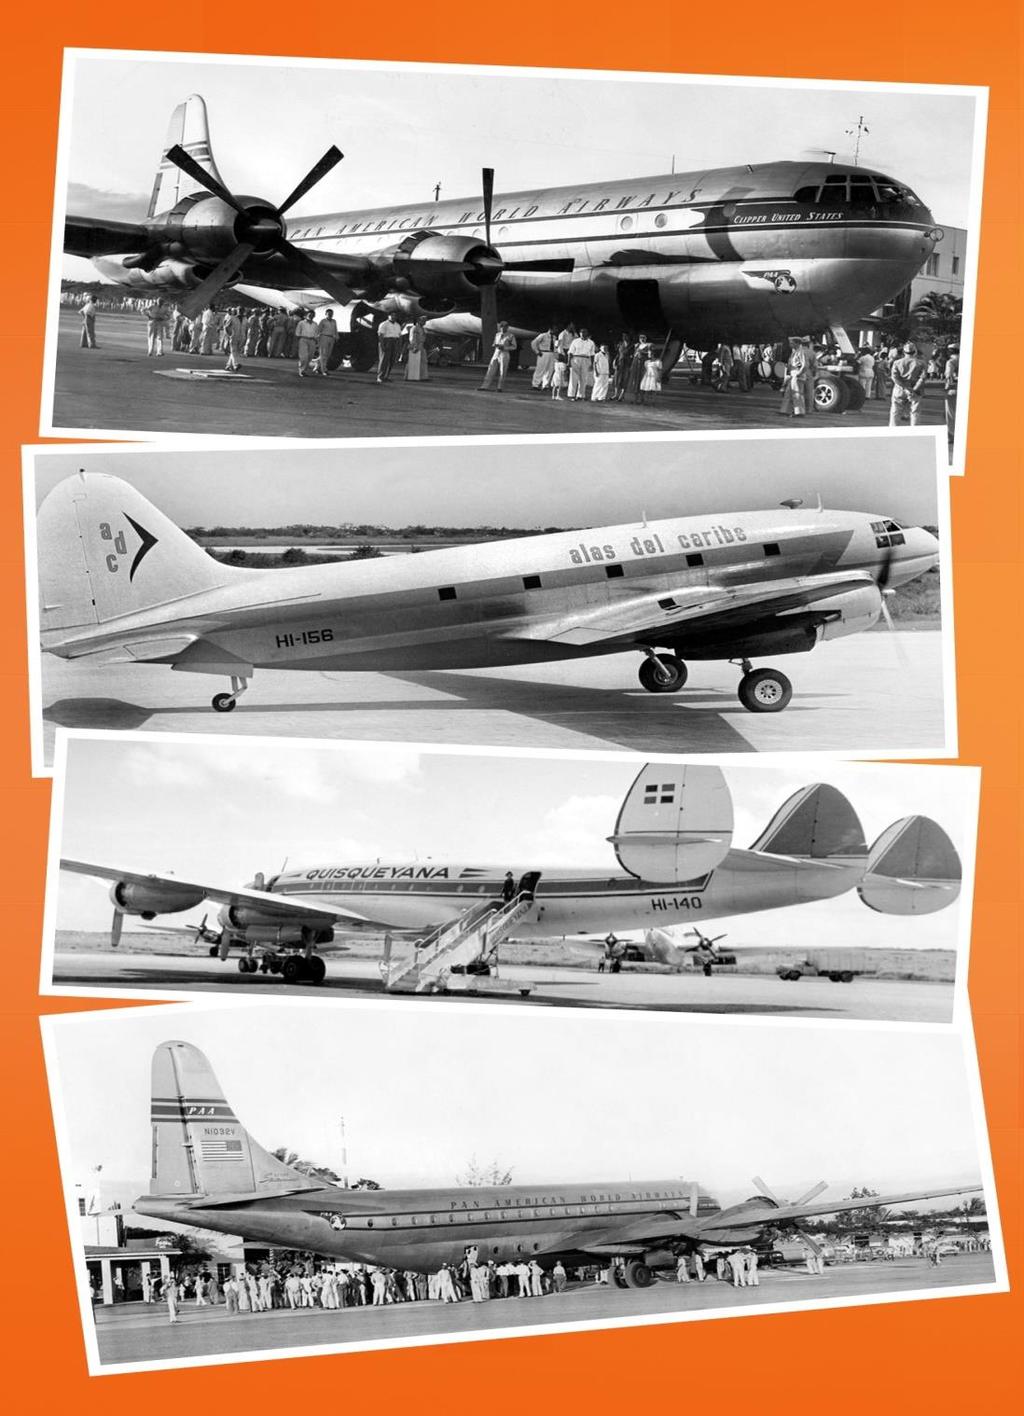 PROMOTION OF AVIATION GALLERY OF